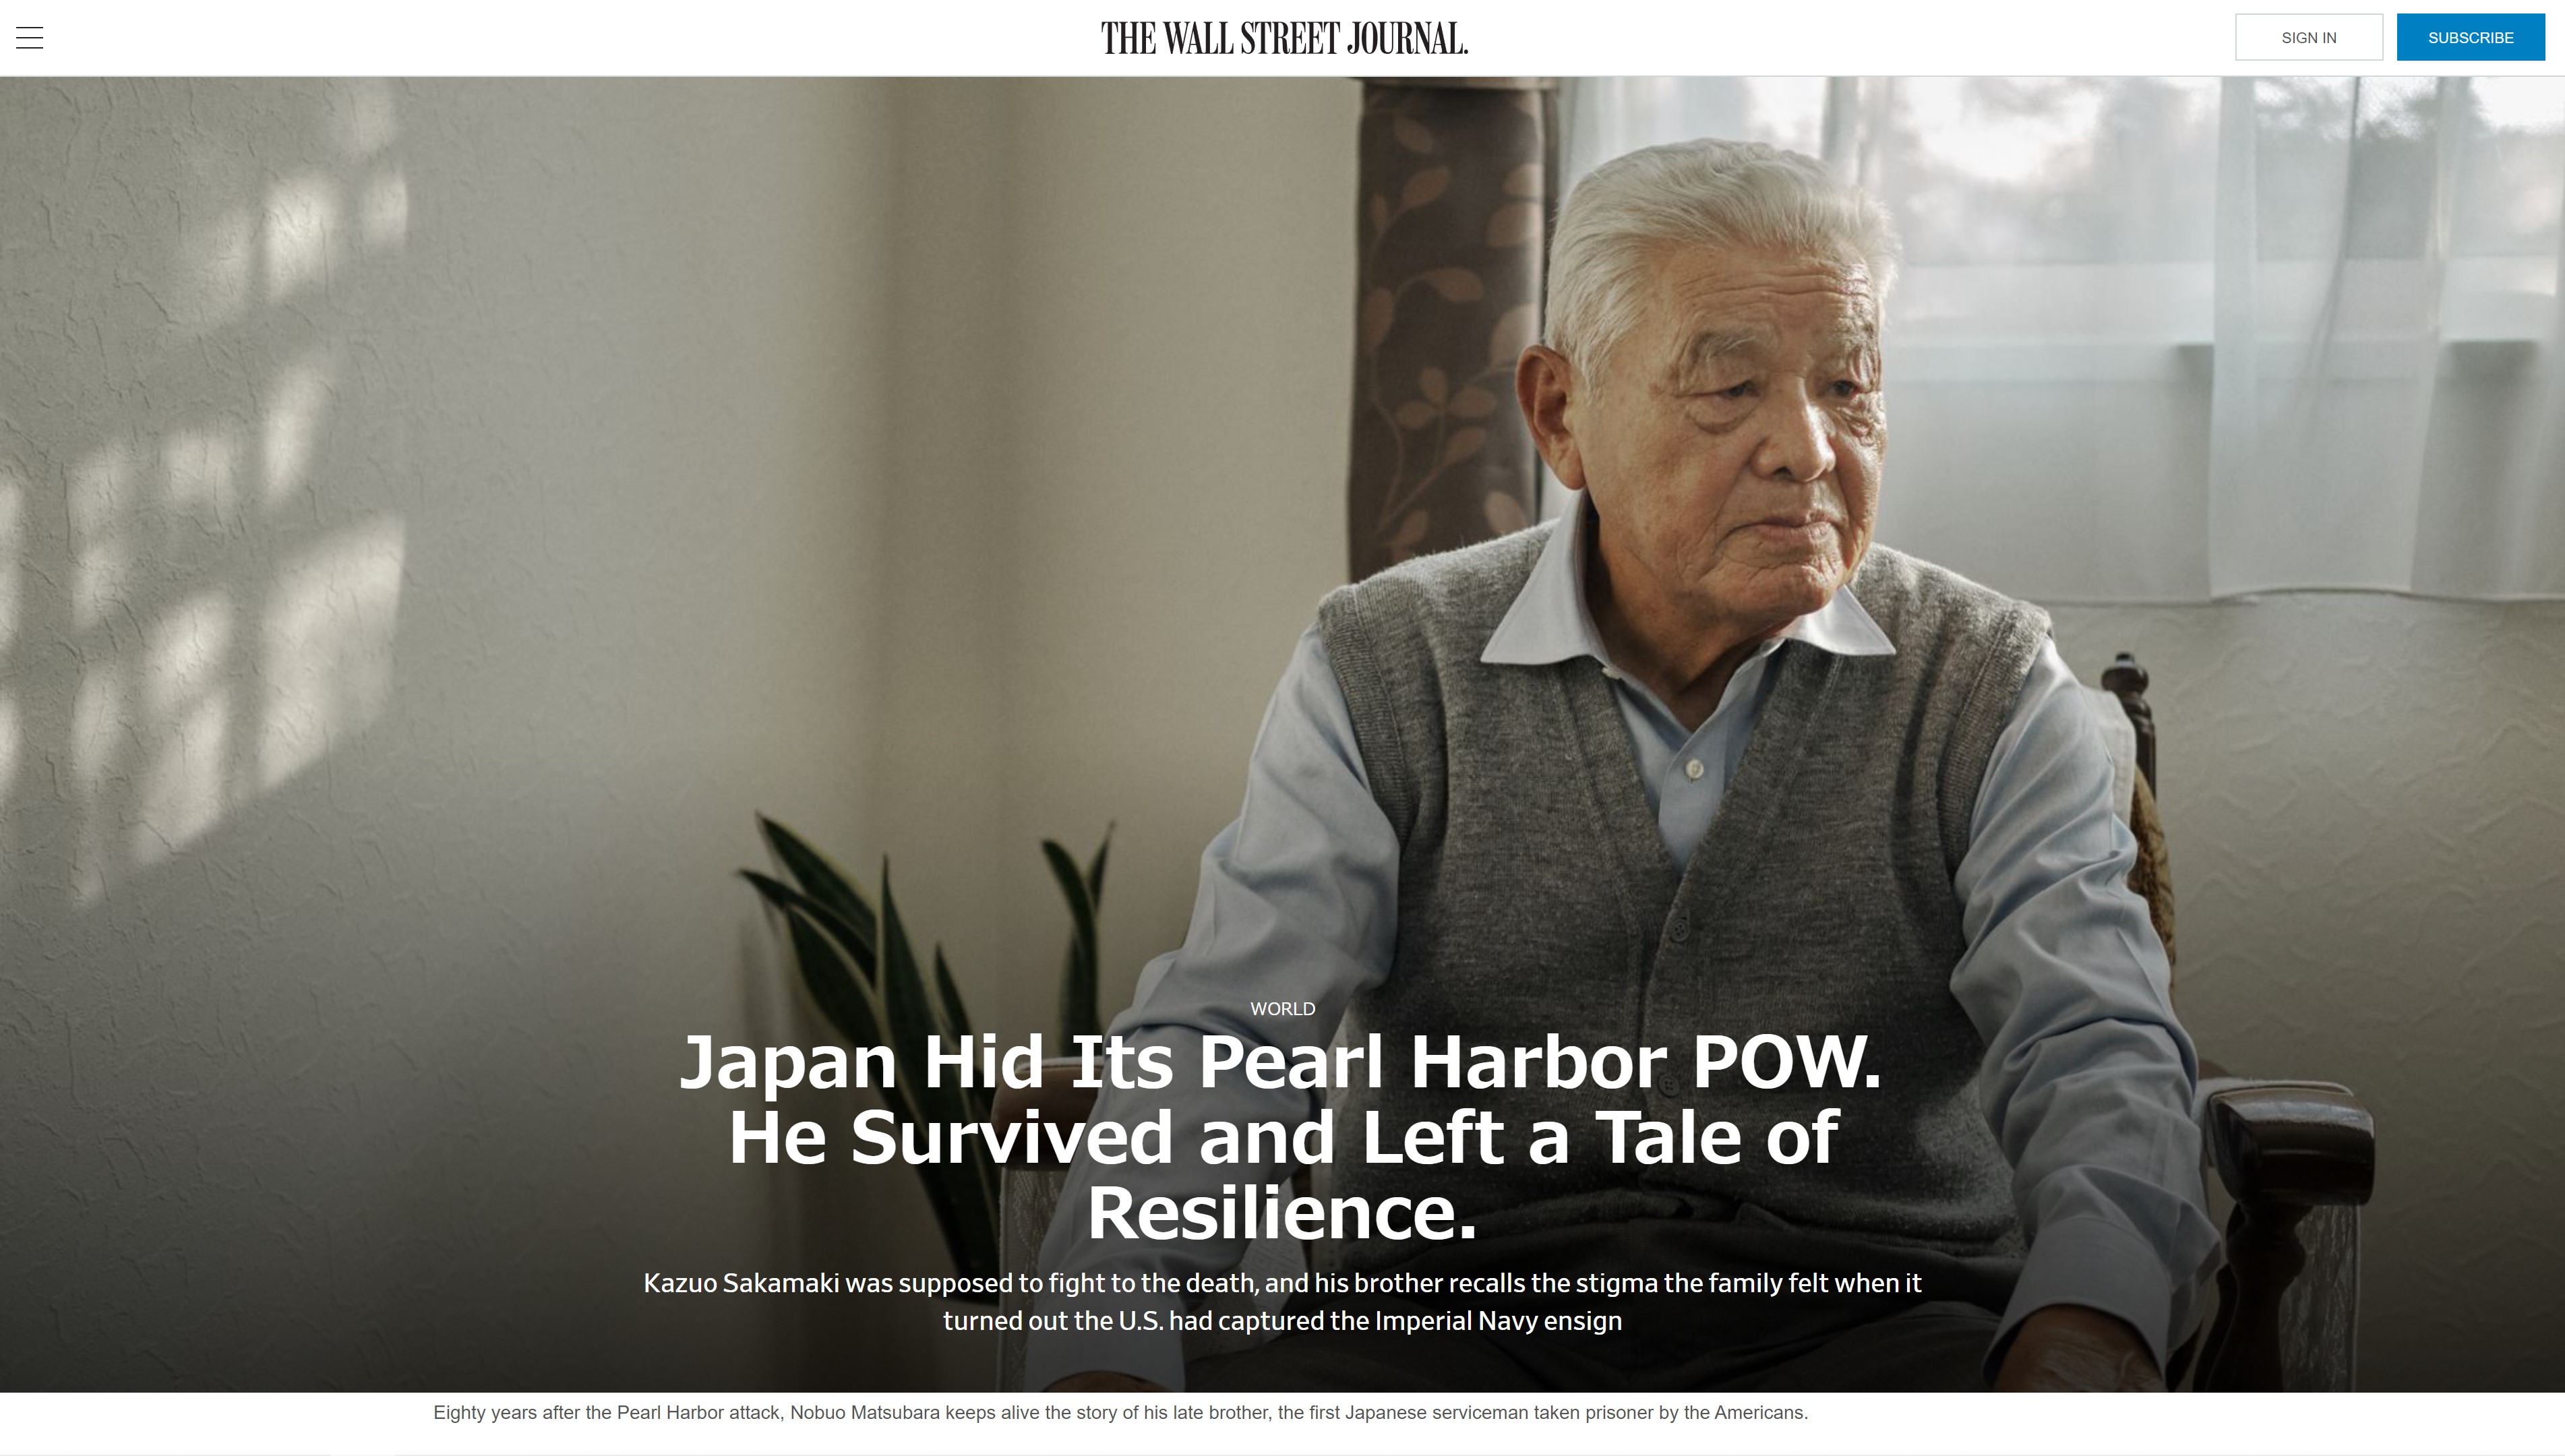 Japan Hid Its Pearl Harbor POW. He Survived and Left a Tale of Resilience. / The Wall Street Journal